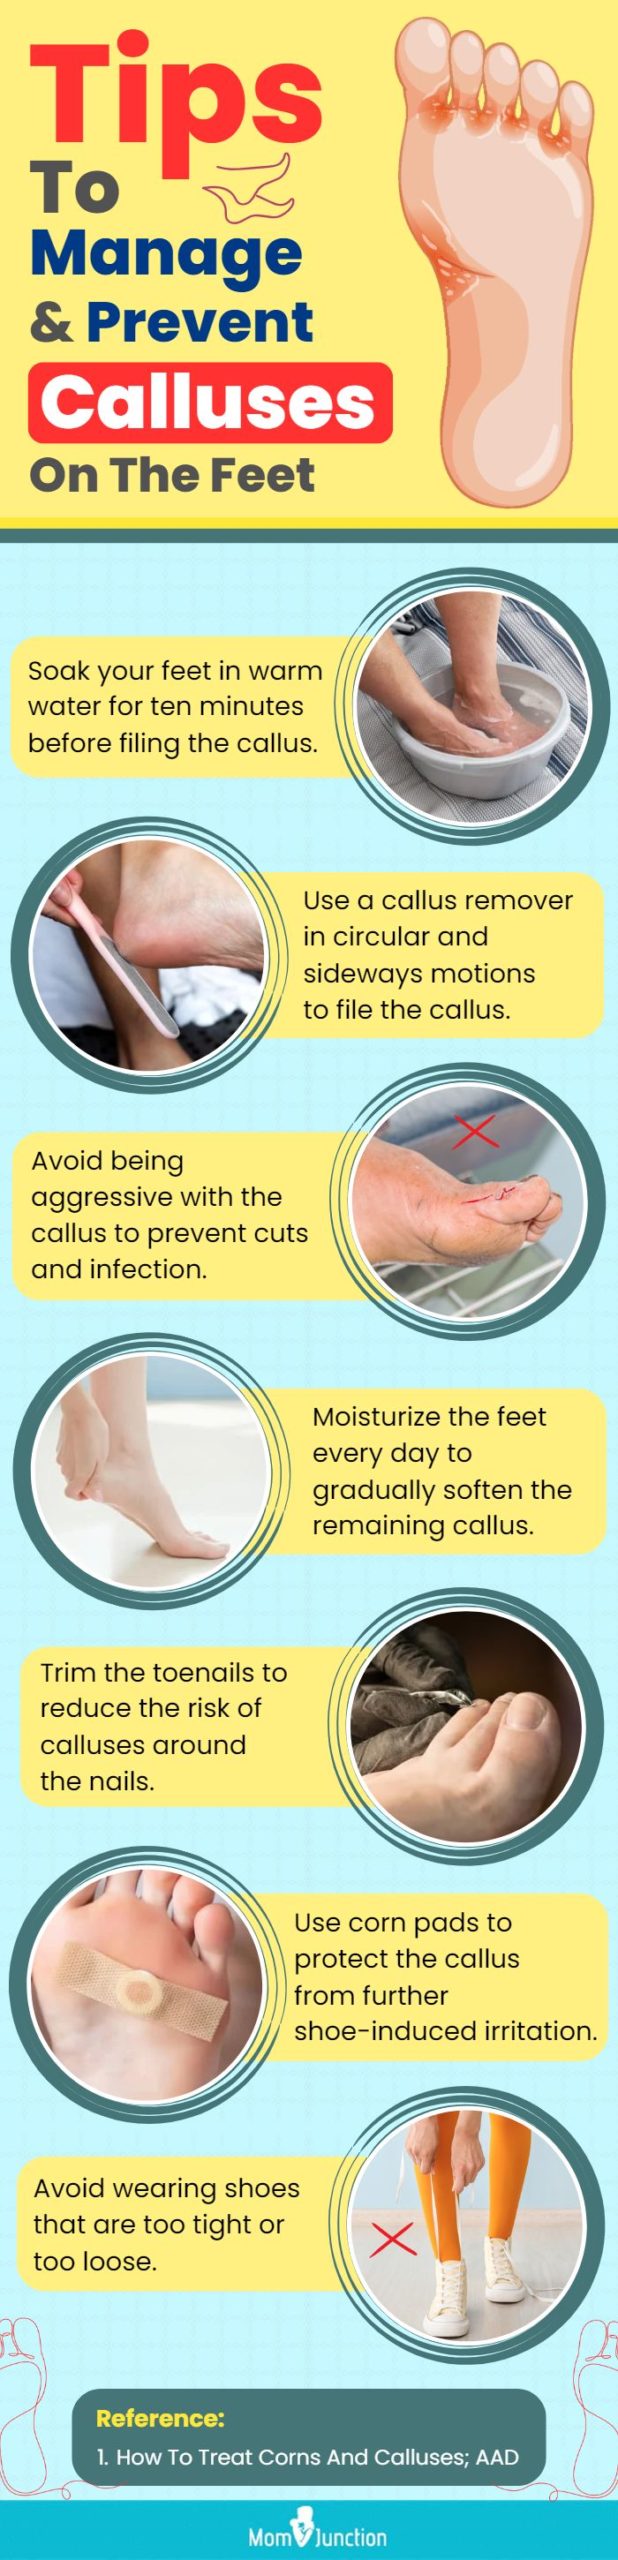 https://www.momjunction.com/wp-content/uploads/2023/05/Tips-To-Manage-And-Prevent-Calluses-On-The-Feet-scaled.jpg